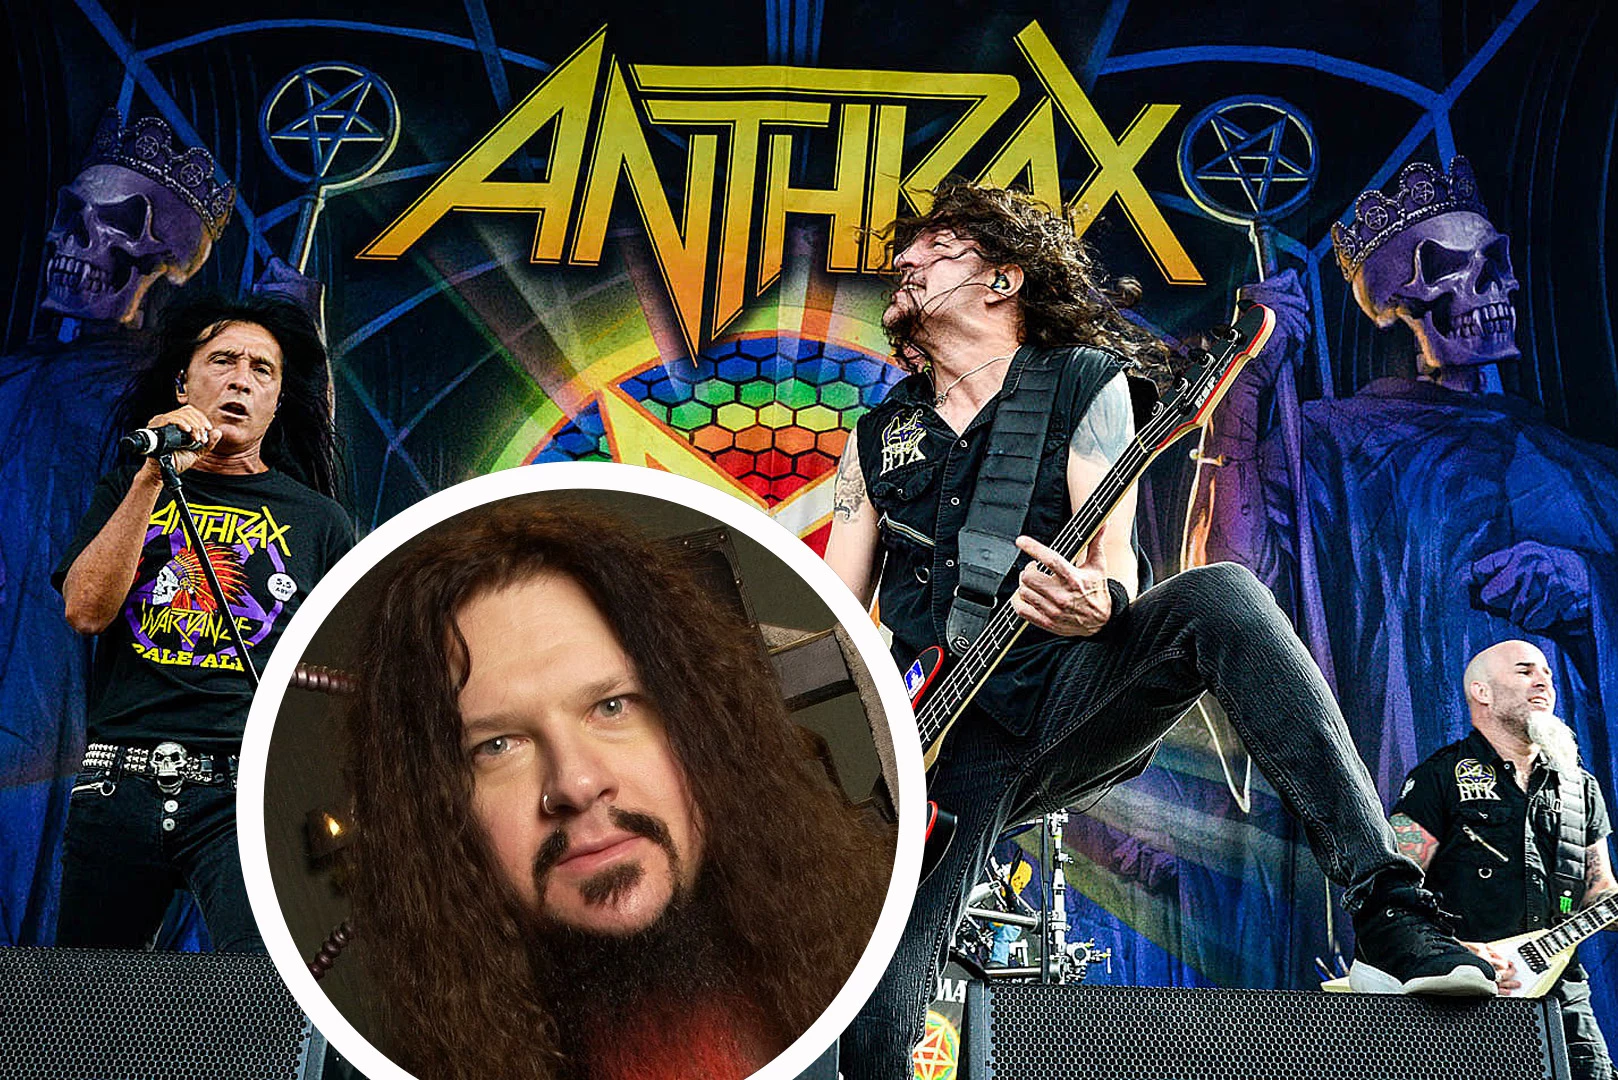 Anthrax Cover Part of Pantera Song in Honor of Dimebag Birthday